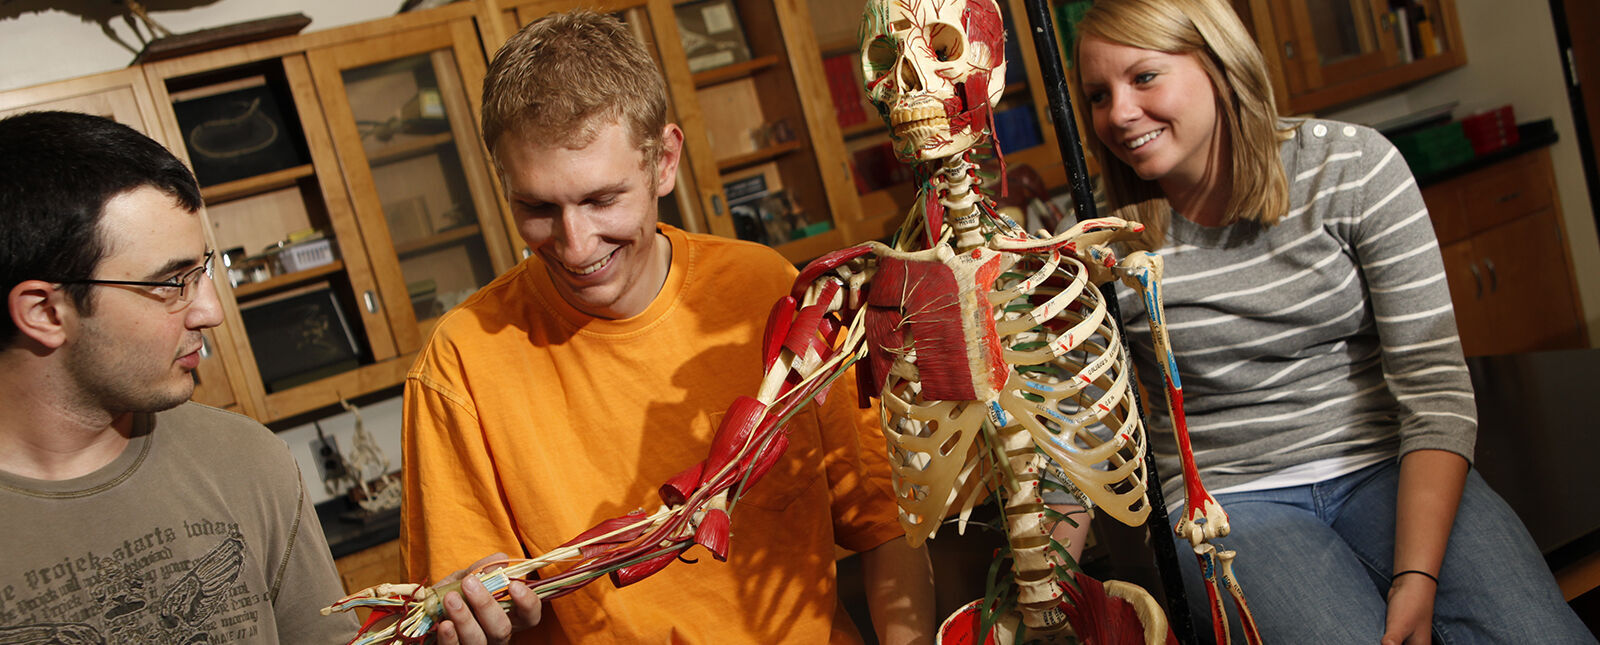 Students stretch out the arm of a model skeleton